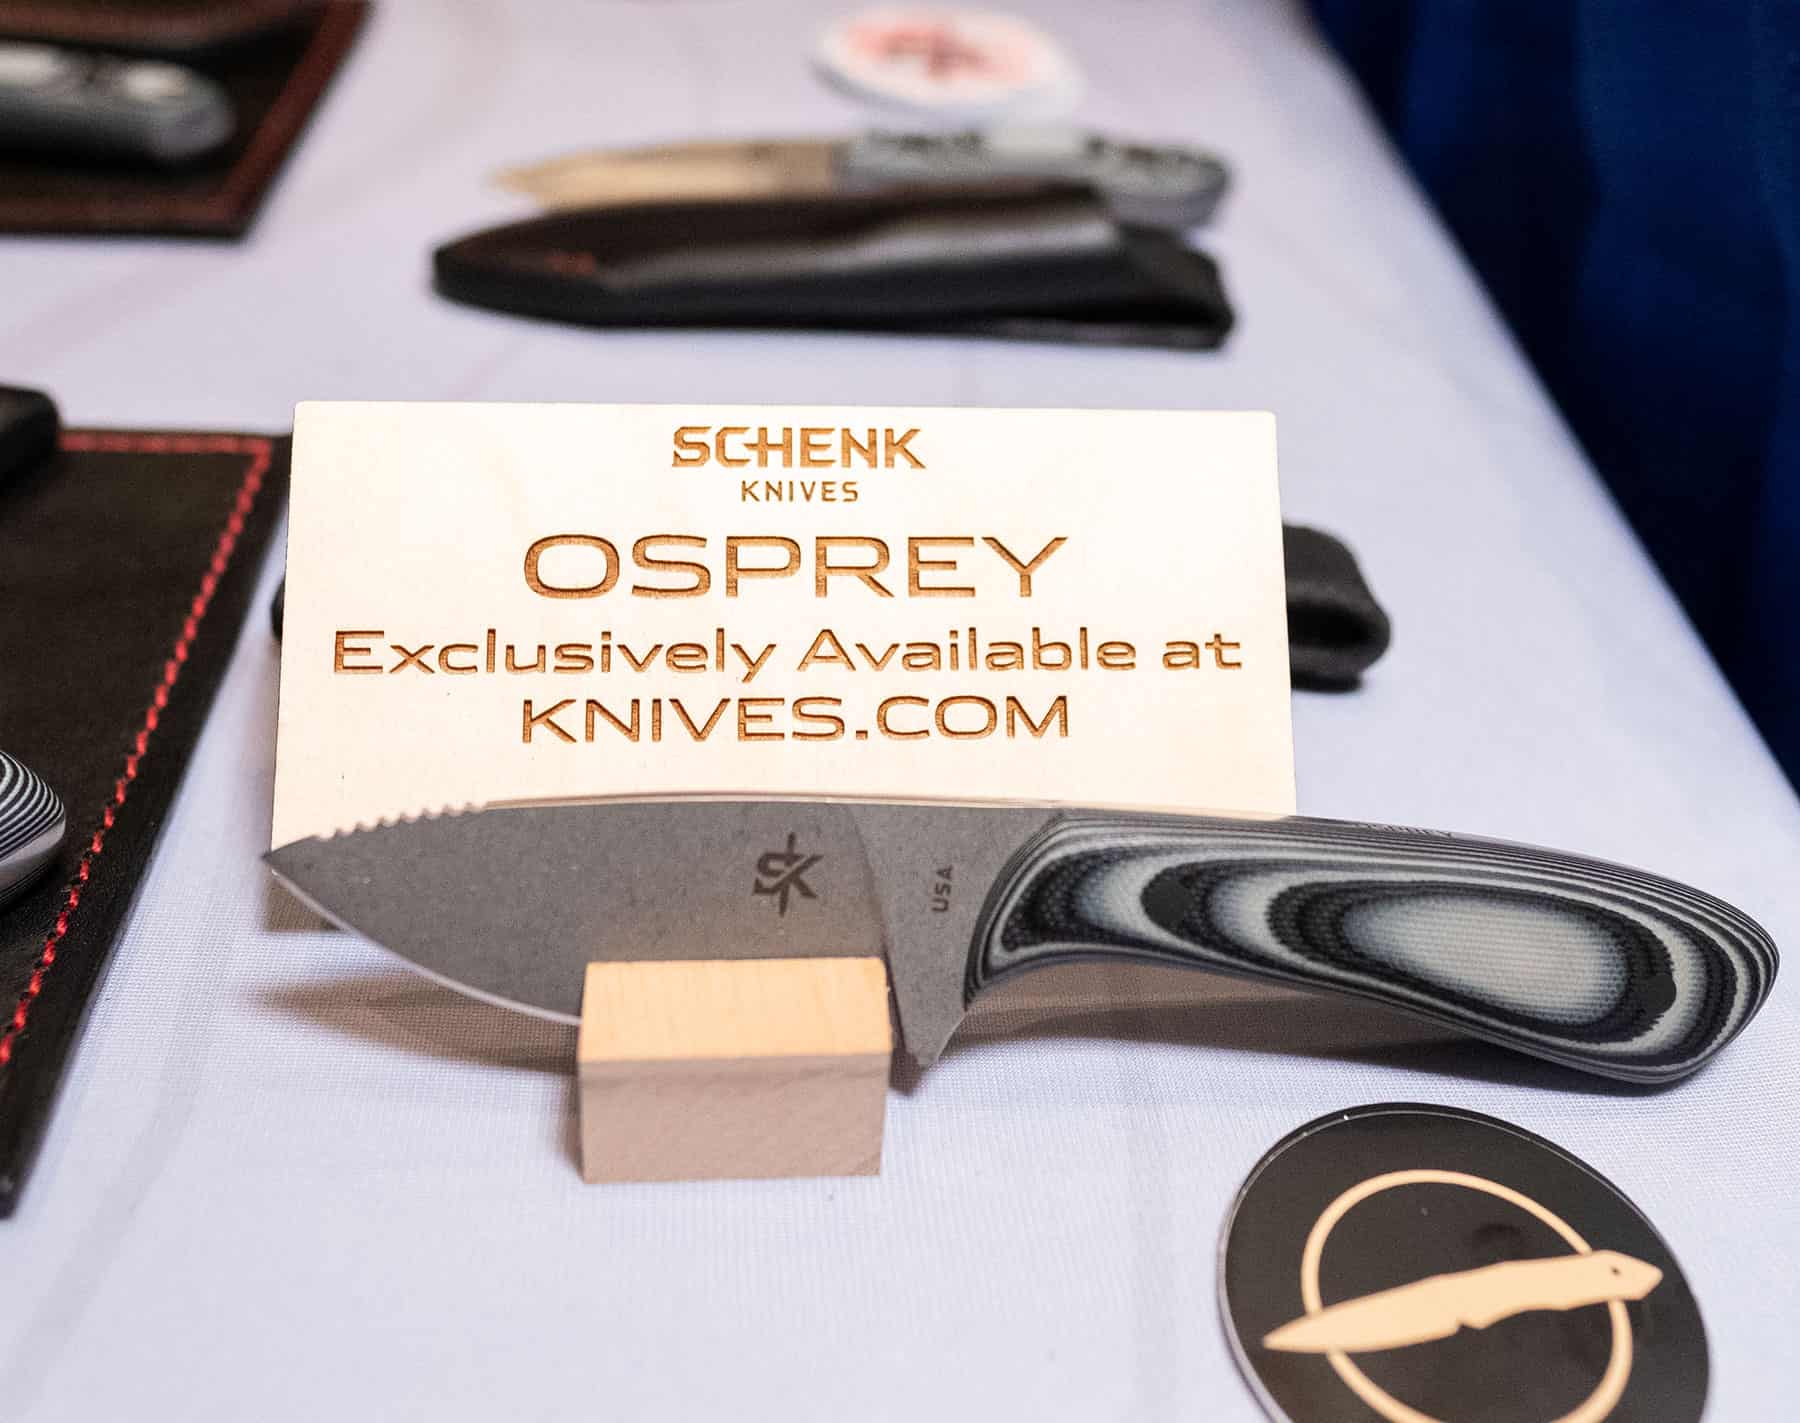 The Schenk Knives Osprey was one of our favorite fixed blades at Blade Show West 2022.